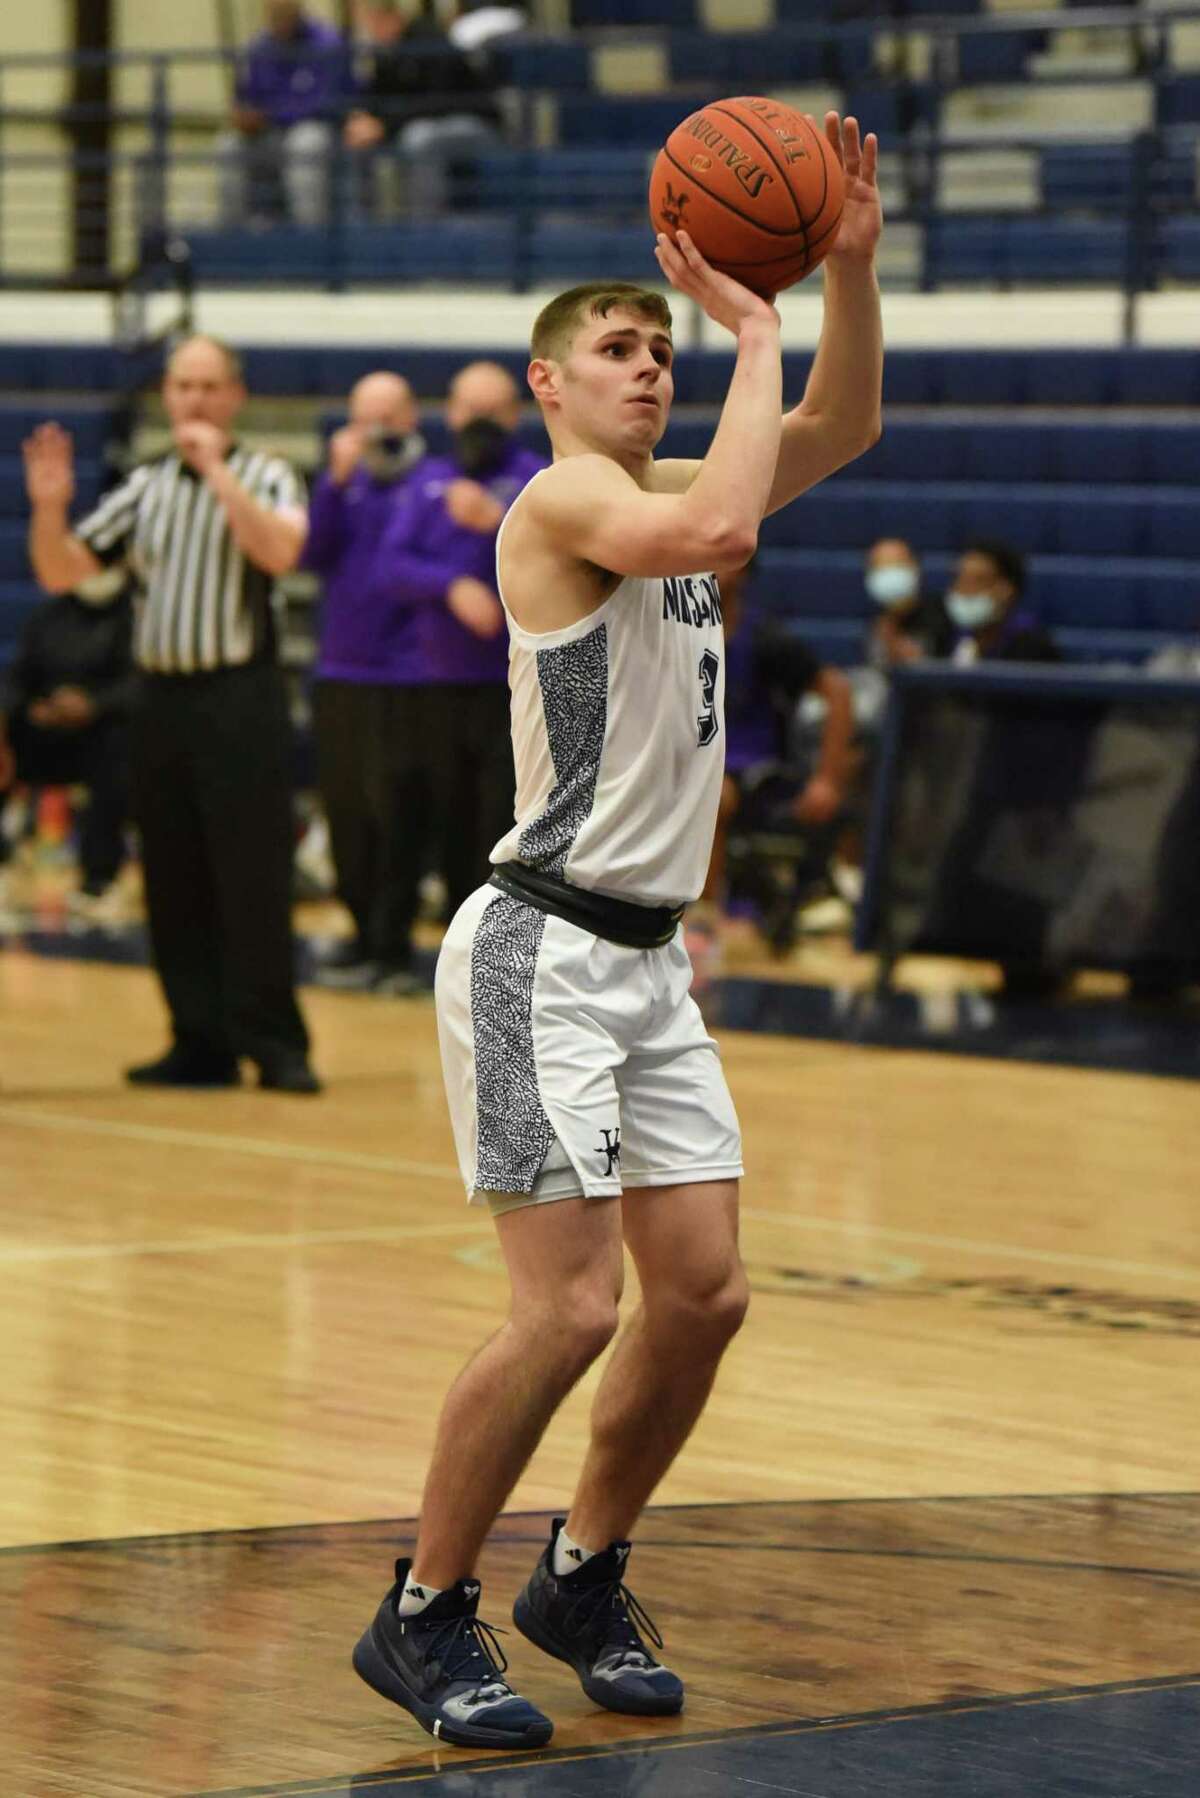 Kingwood point guard Billy Gould driving the basket to make a play for the Mustangs in a District 21-6A game agaisnt Humble at the Mustangs gym.